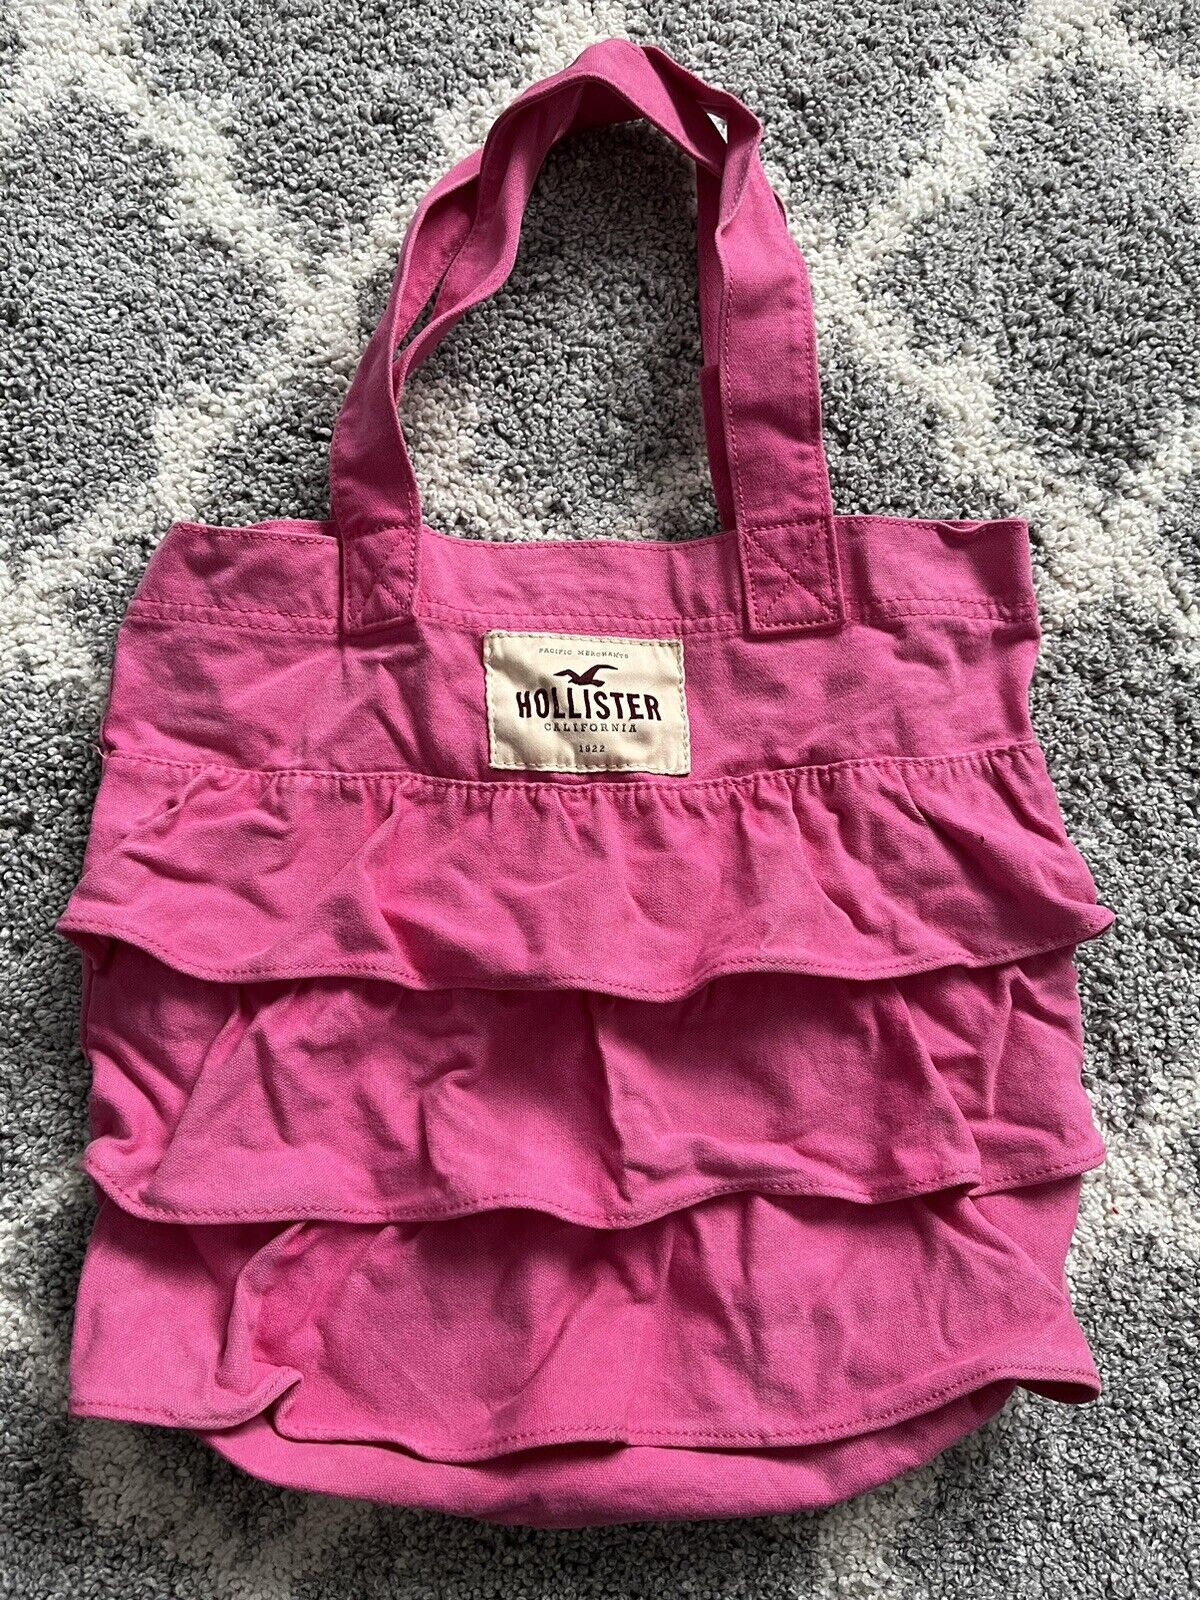 Y2K Hollister Classic Tote Bag with Ruffles Pink Shoulder book